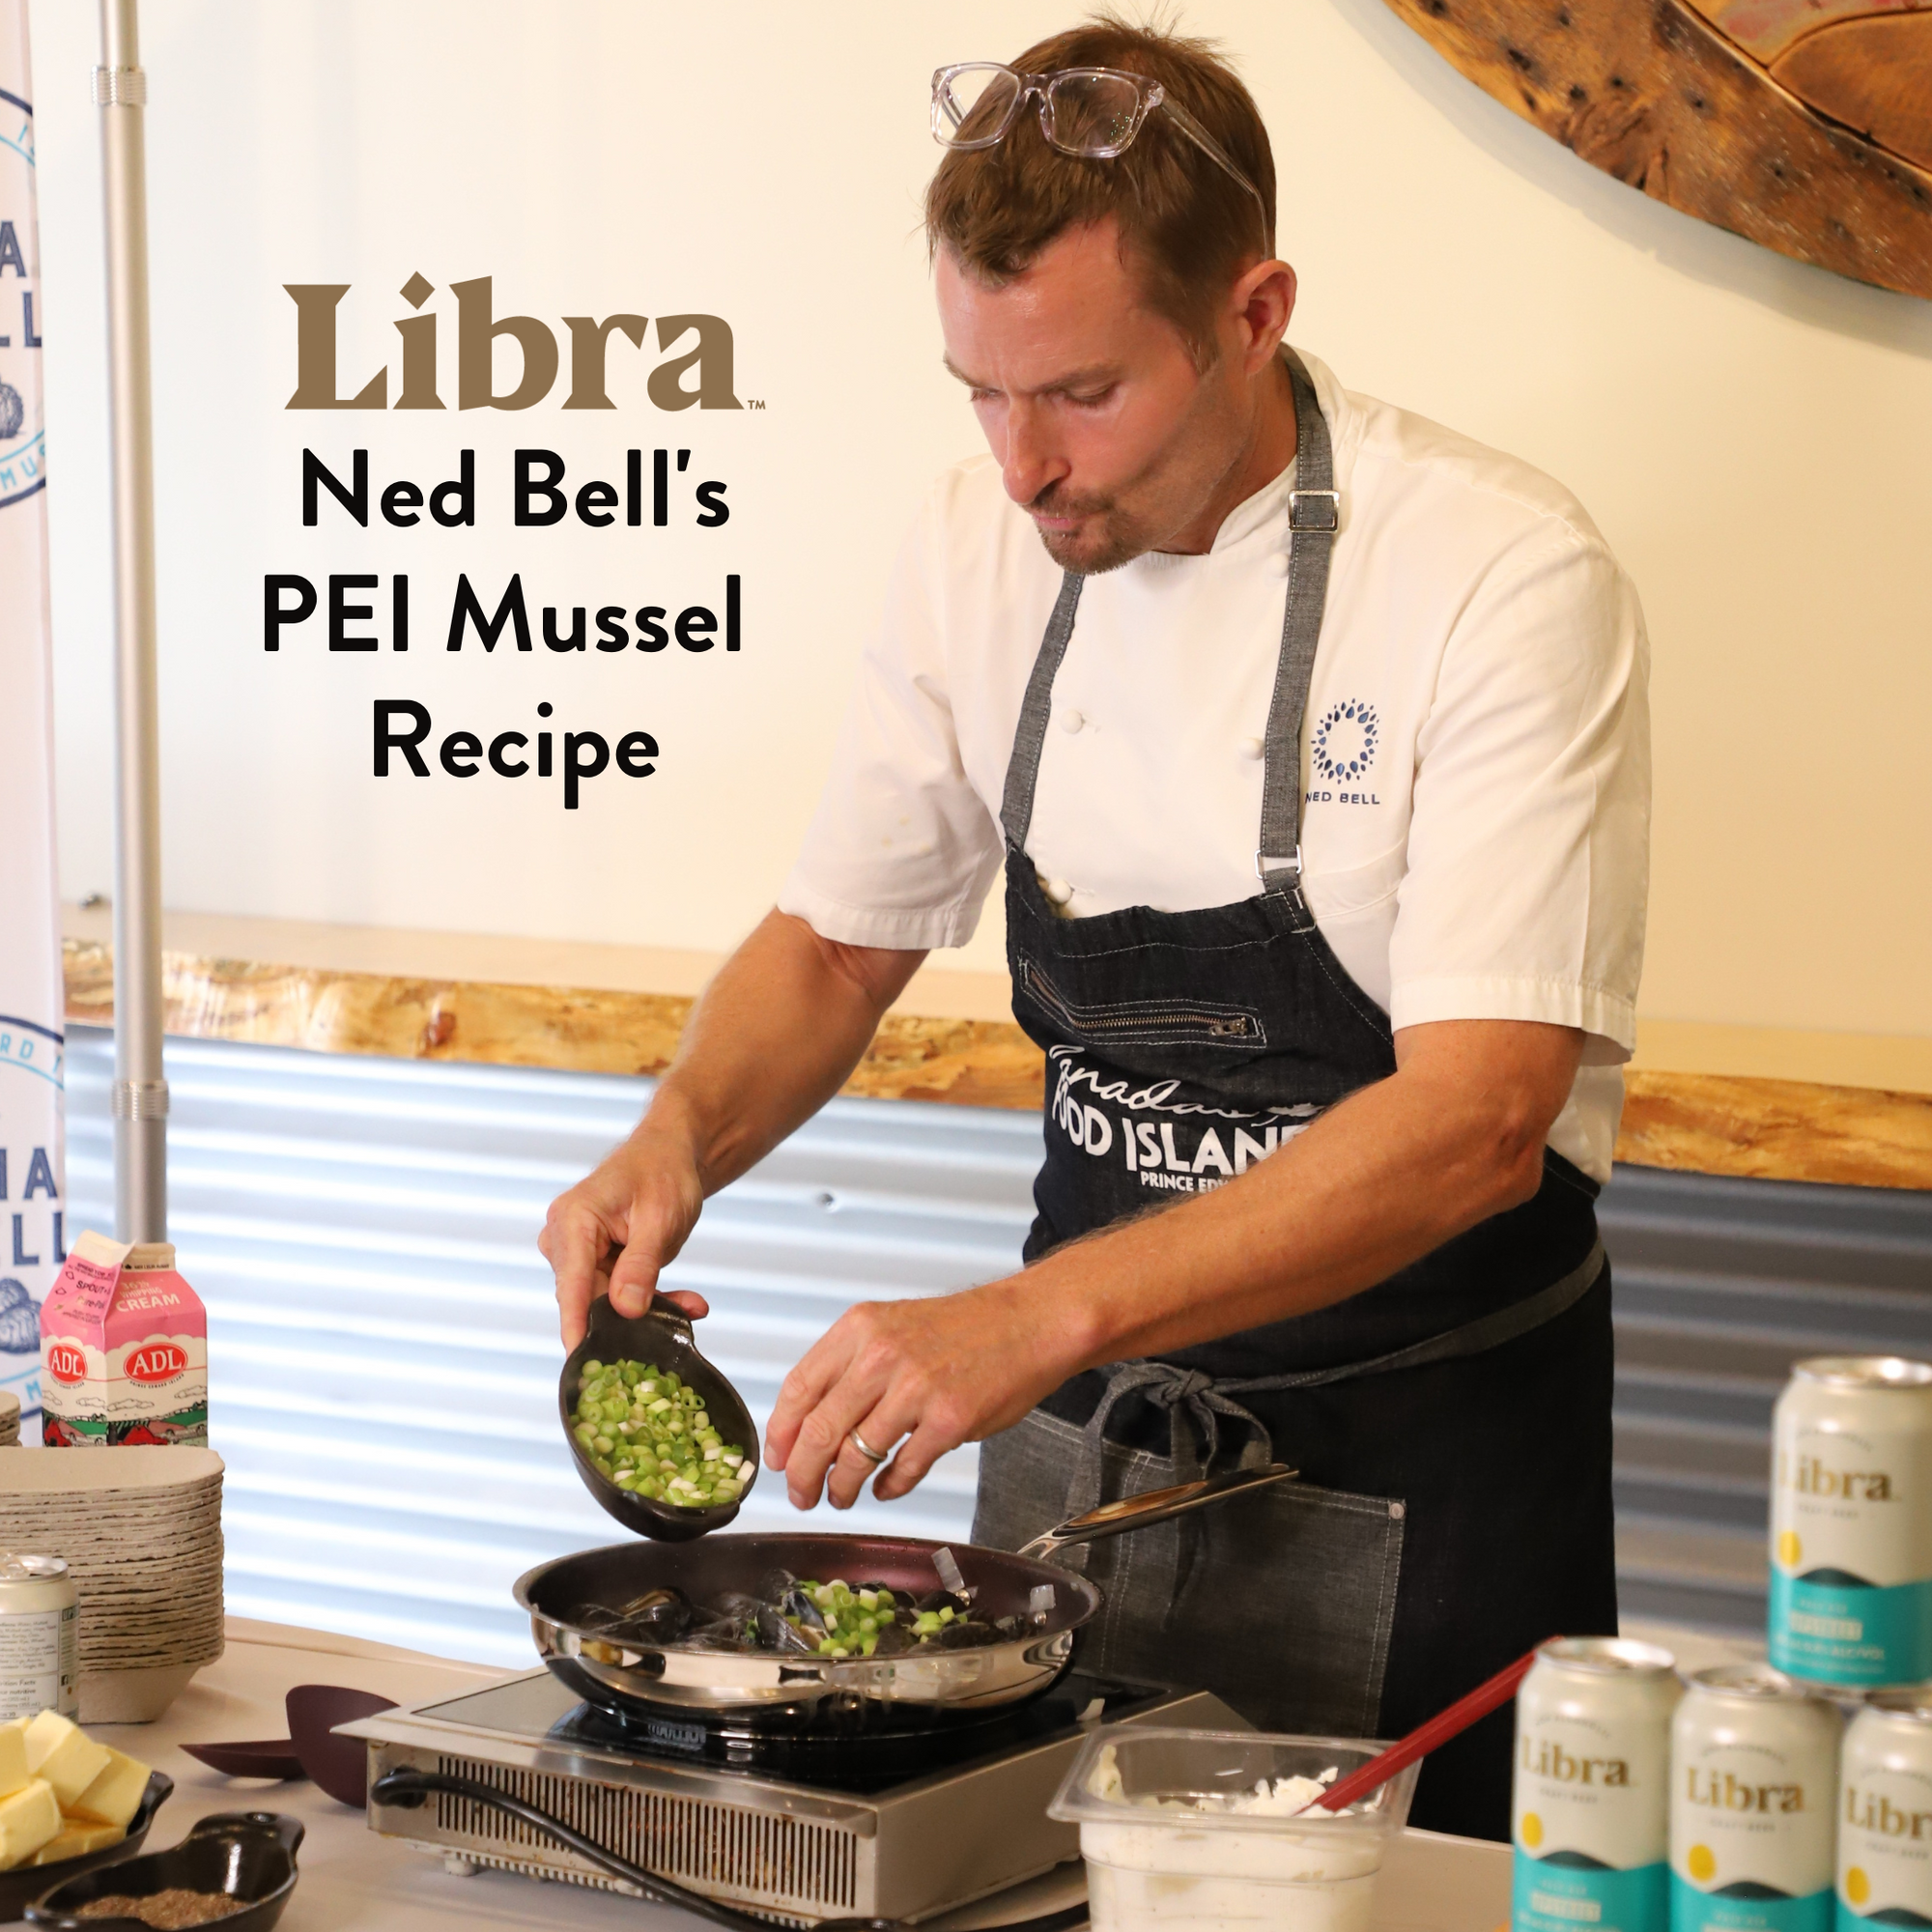 Ned Bell x Libra: Steamed Mussel Recipe with the PEI Social Shell